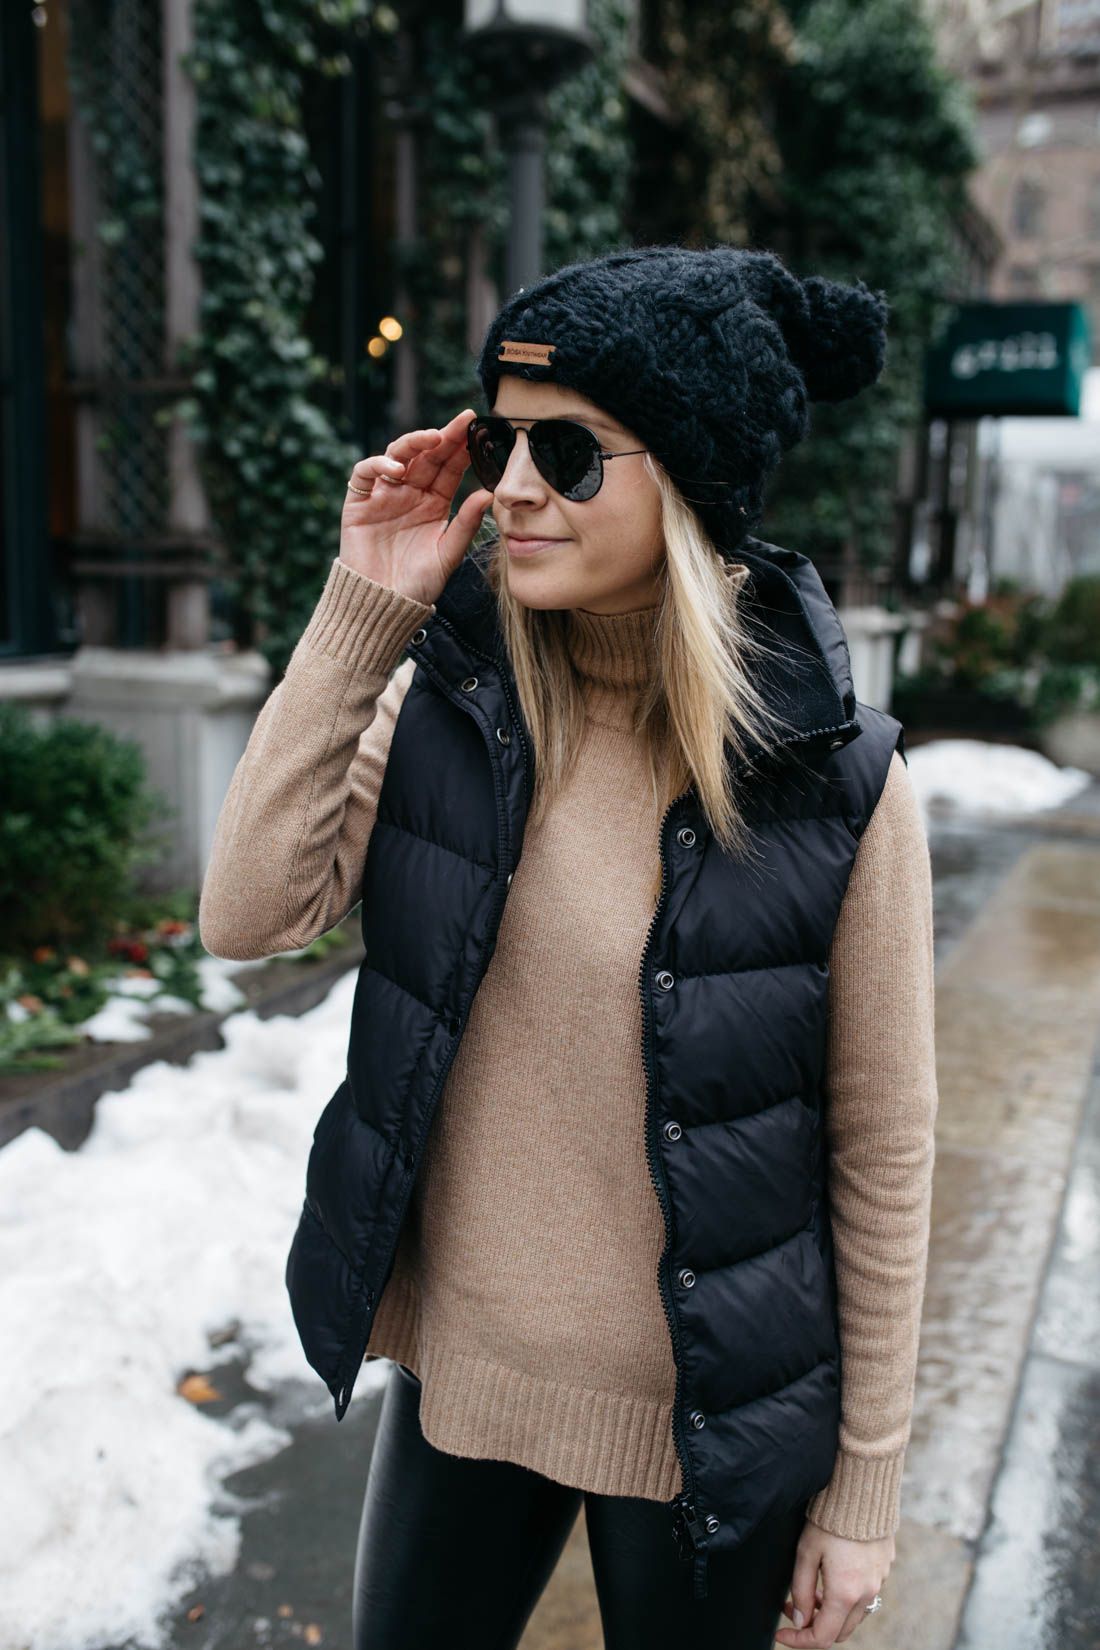 Luxurious Winter Vests for Cold-Weather Comfort